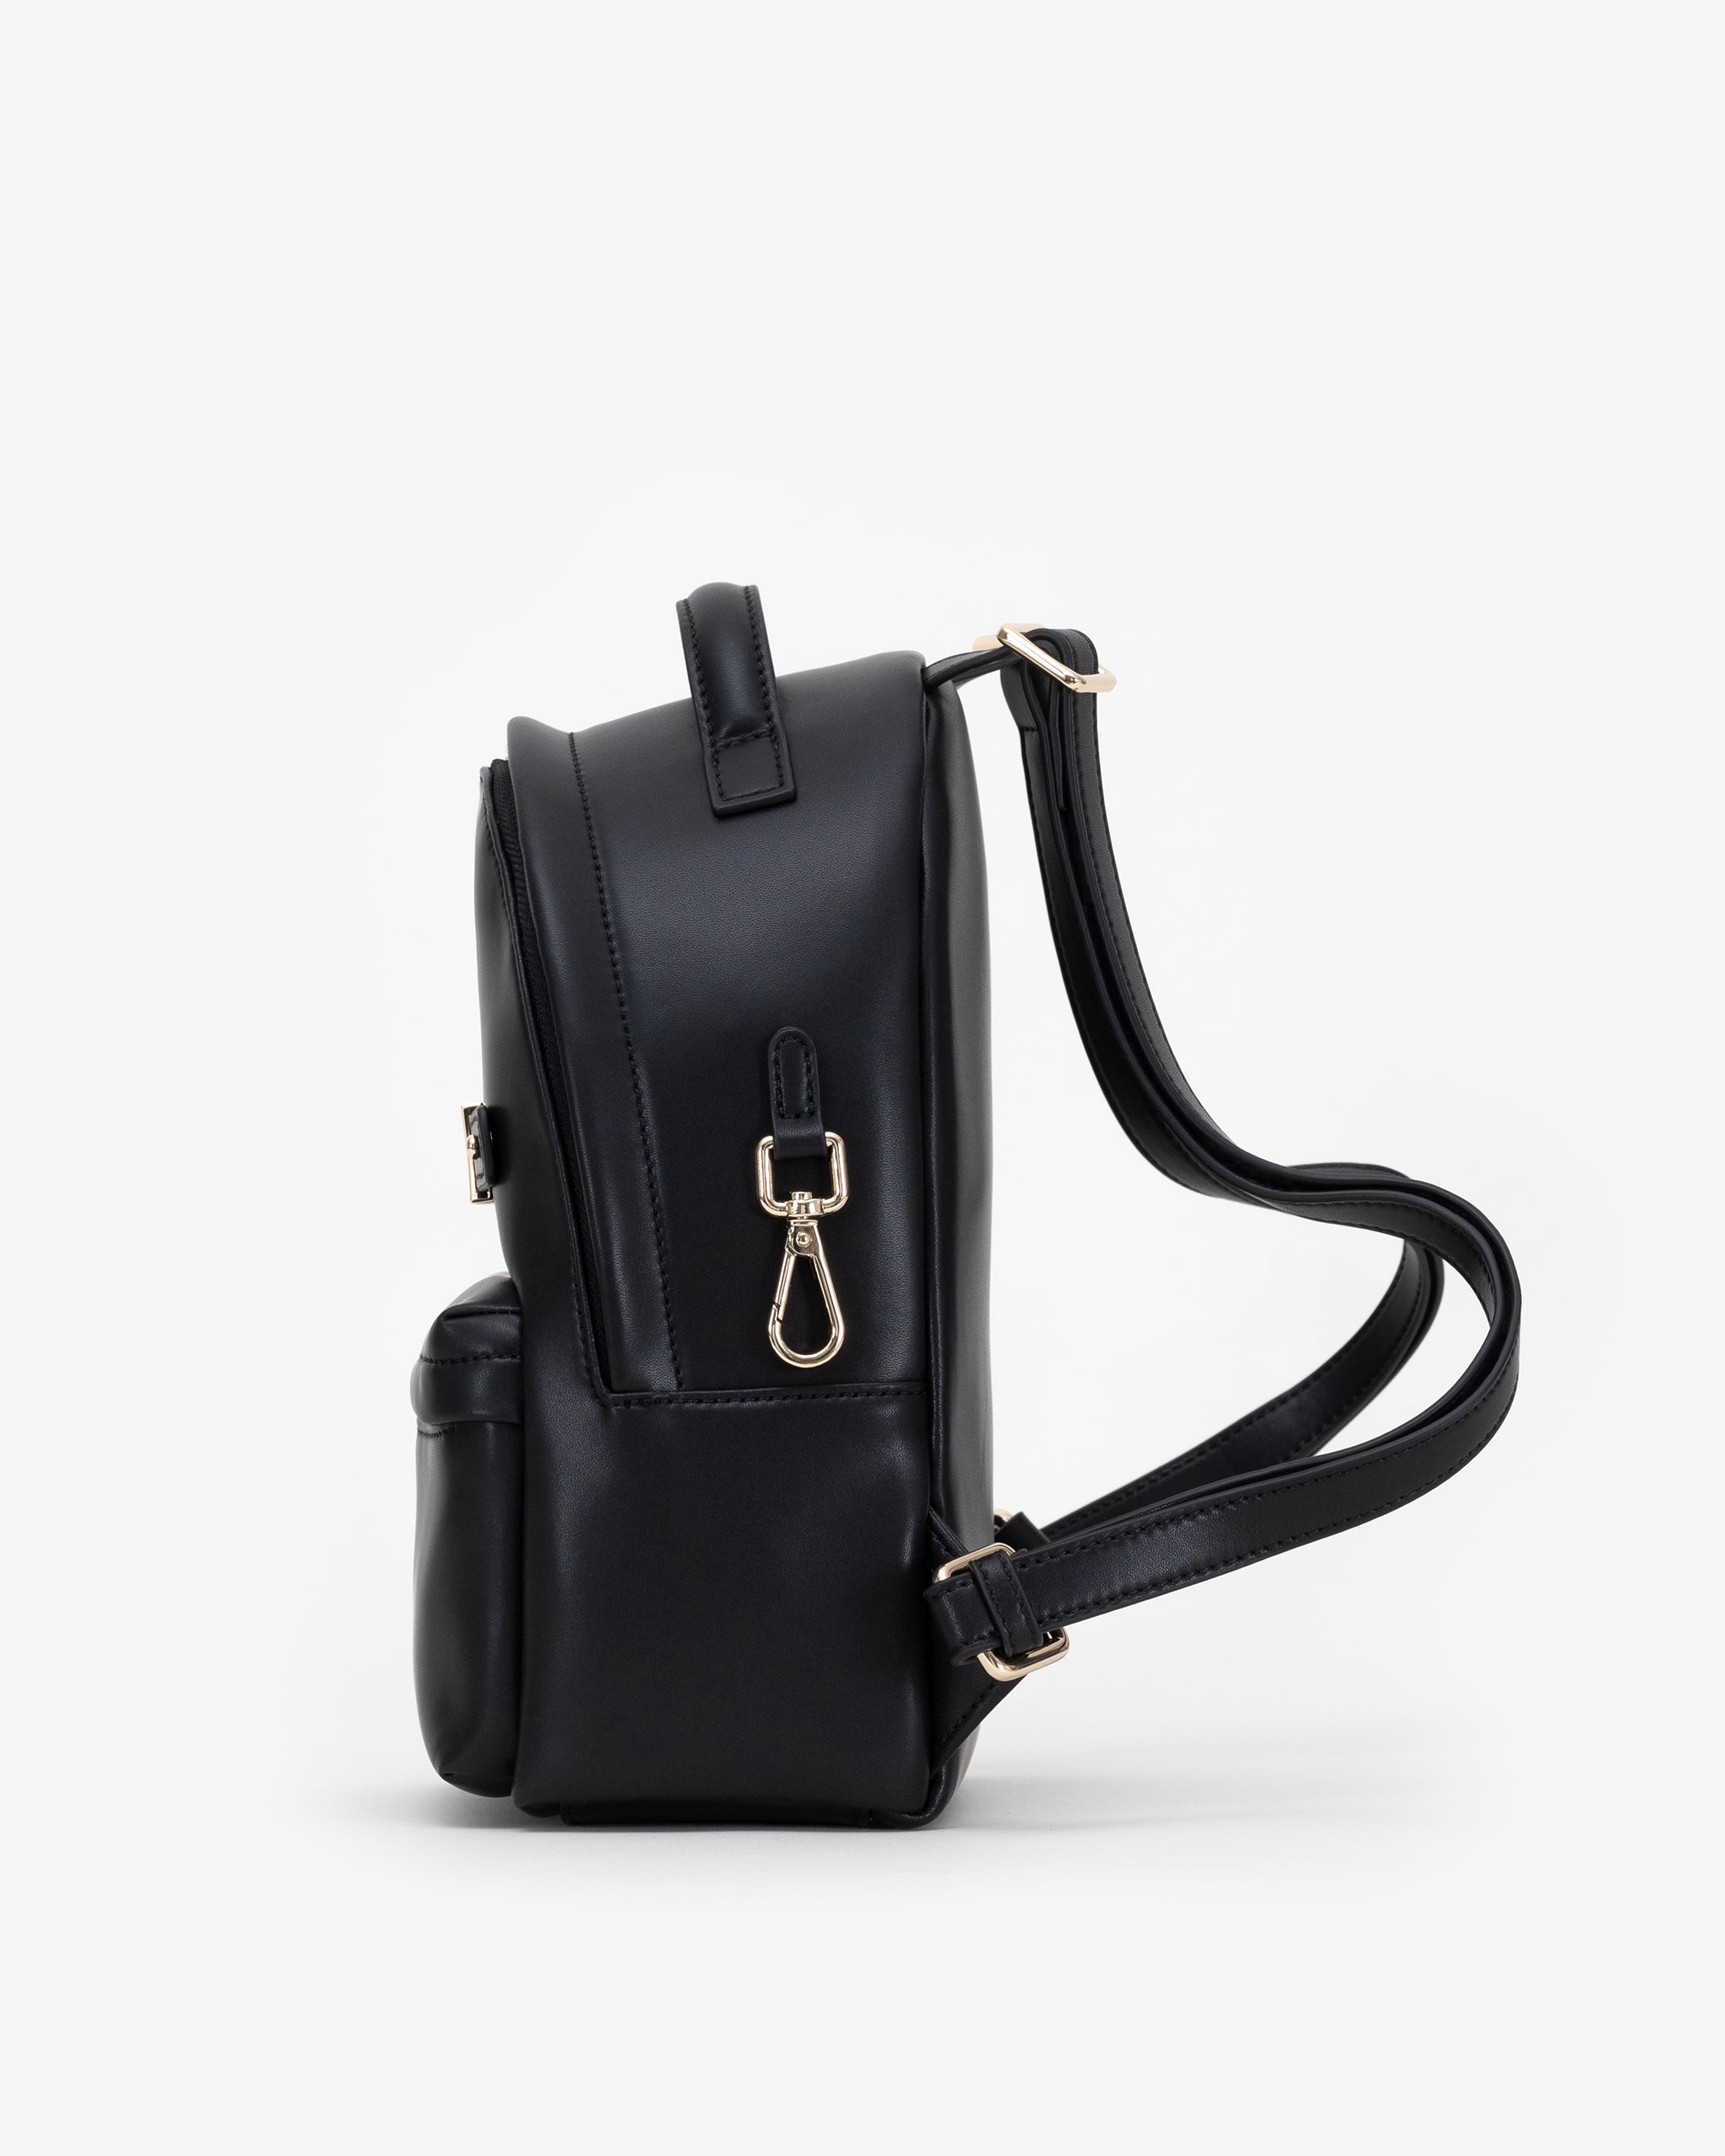 Mini Backpack in Black/Gold with Personalised Hardware